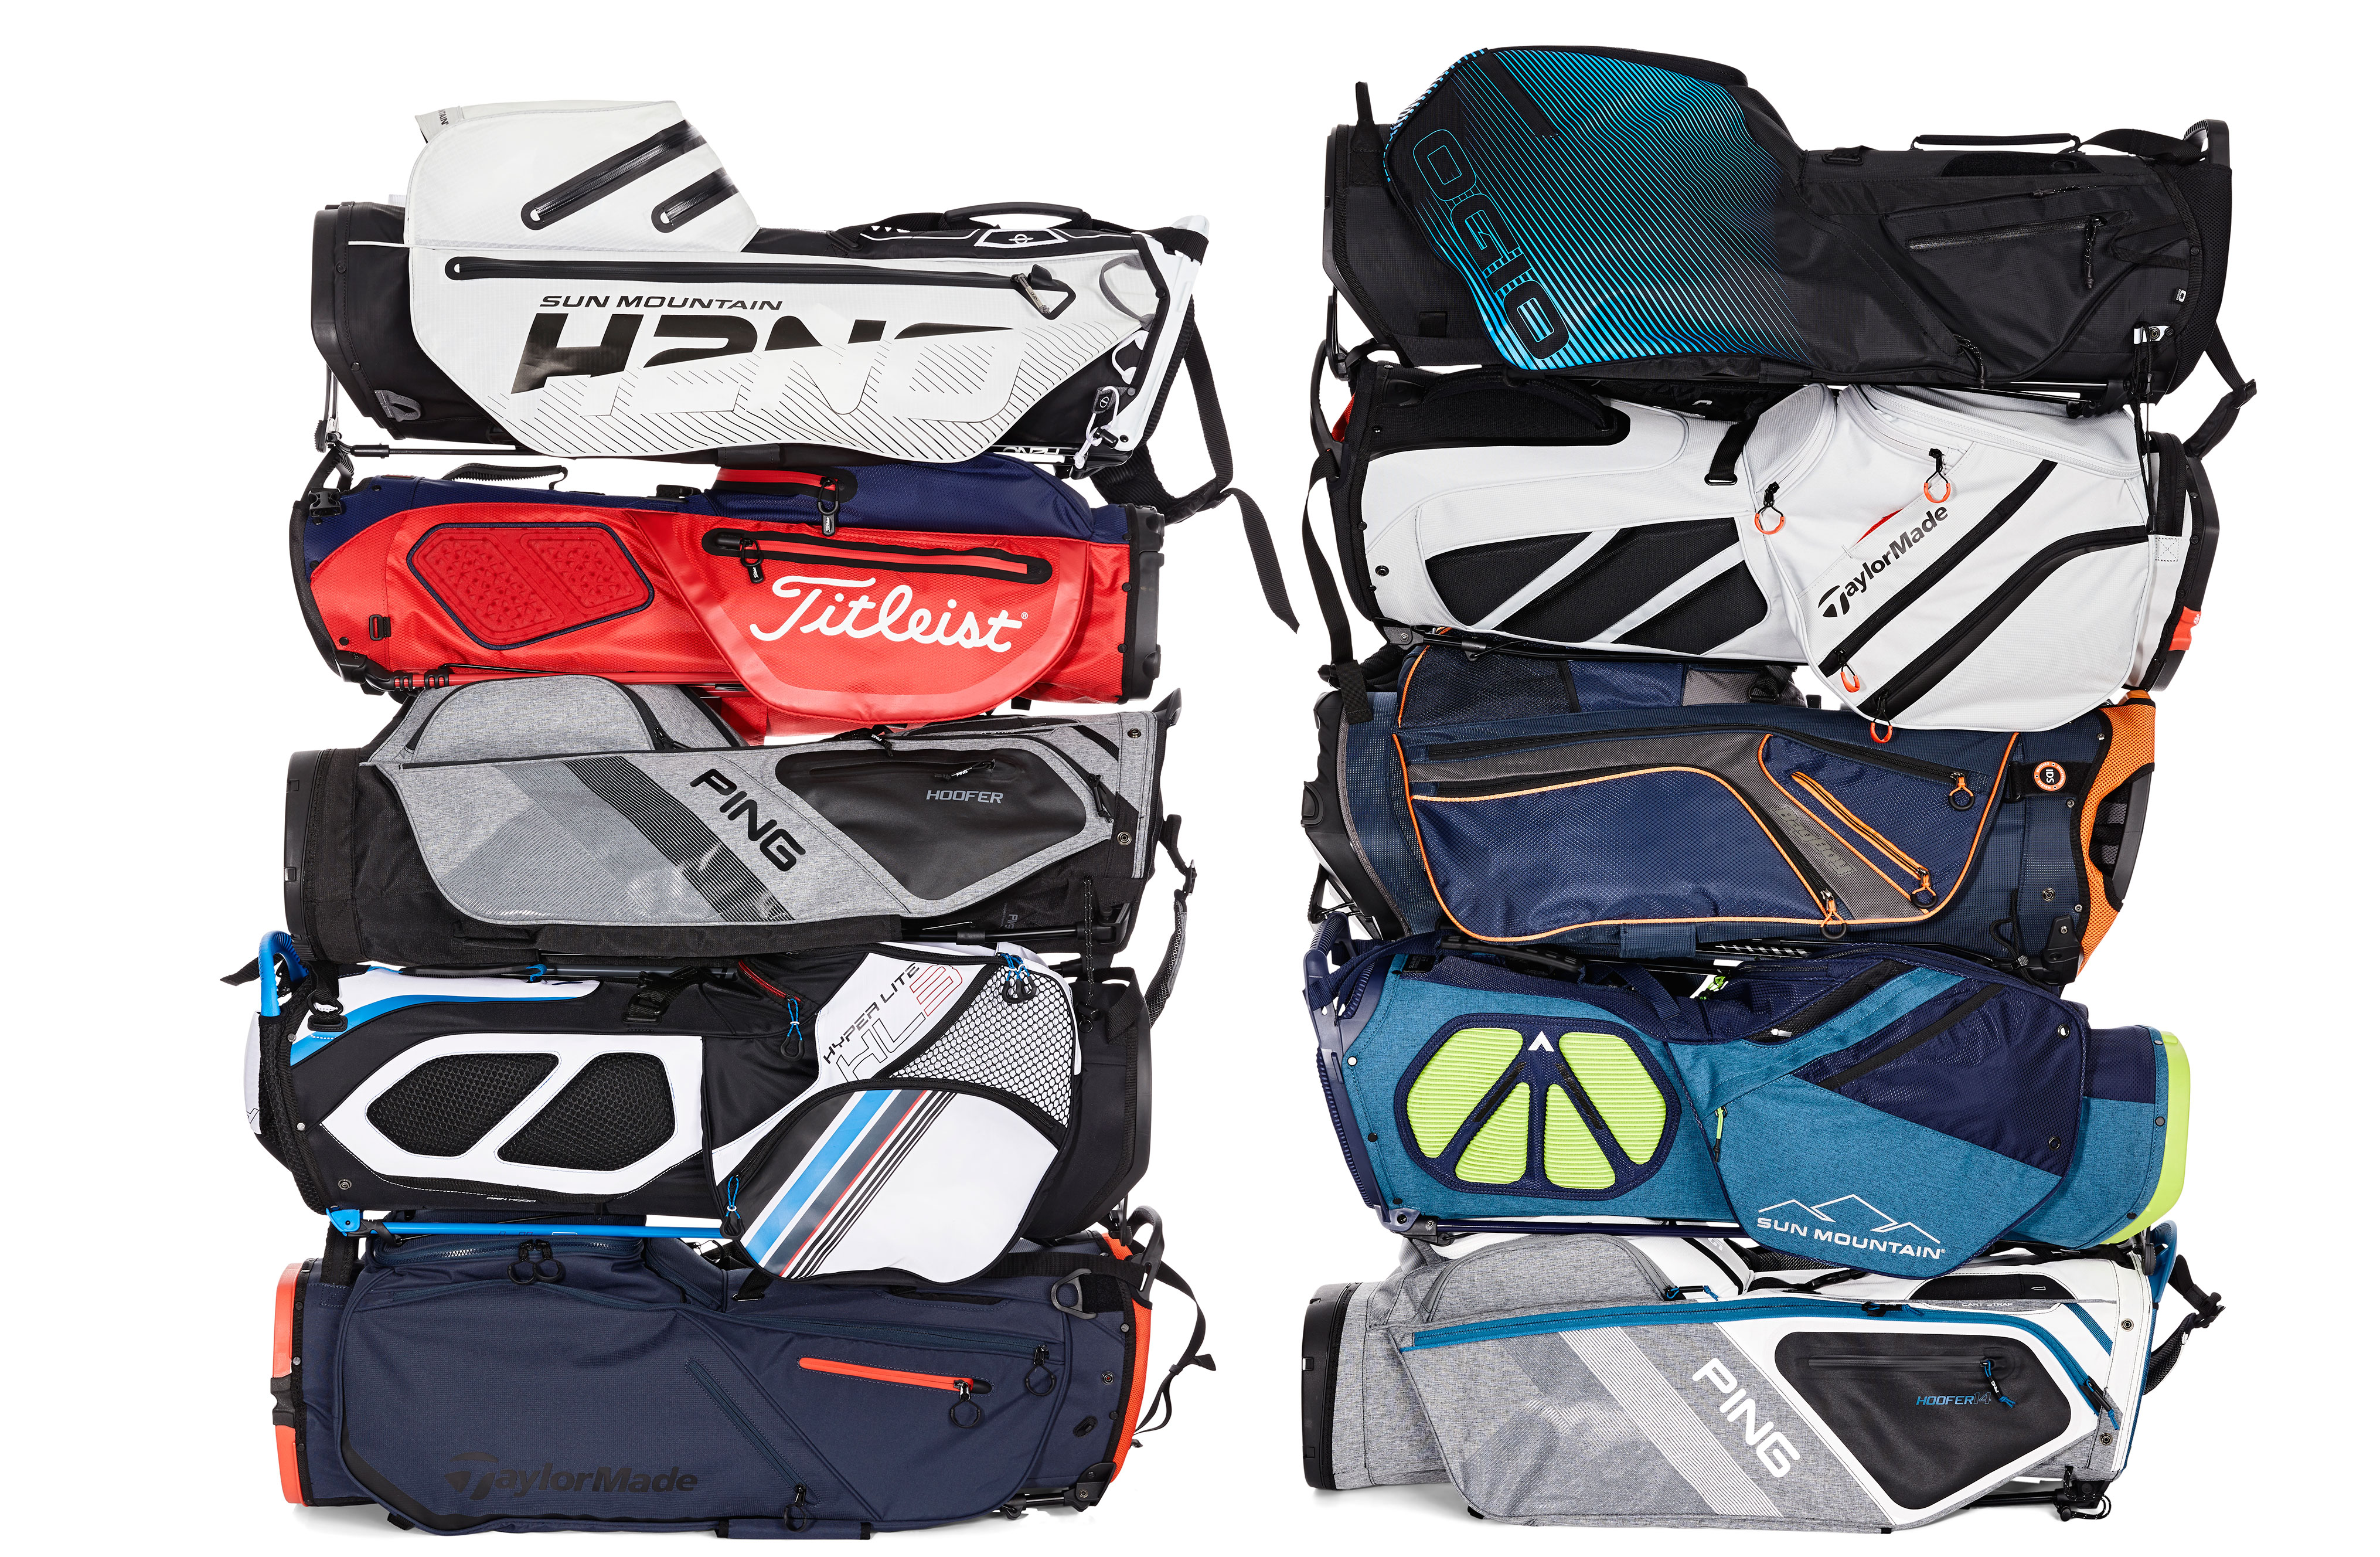 The 5 best golf stand bags on the market  Golf Care Blog